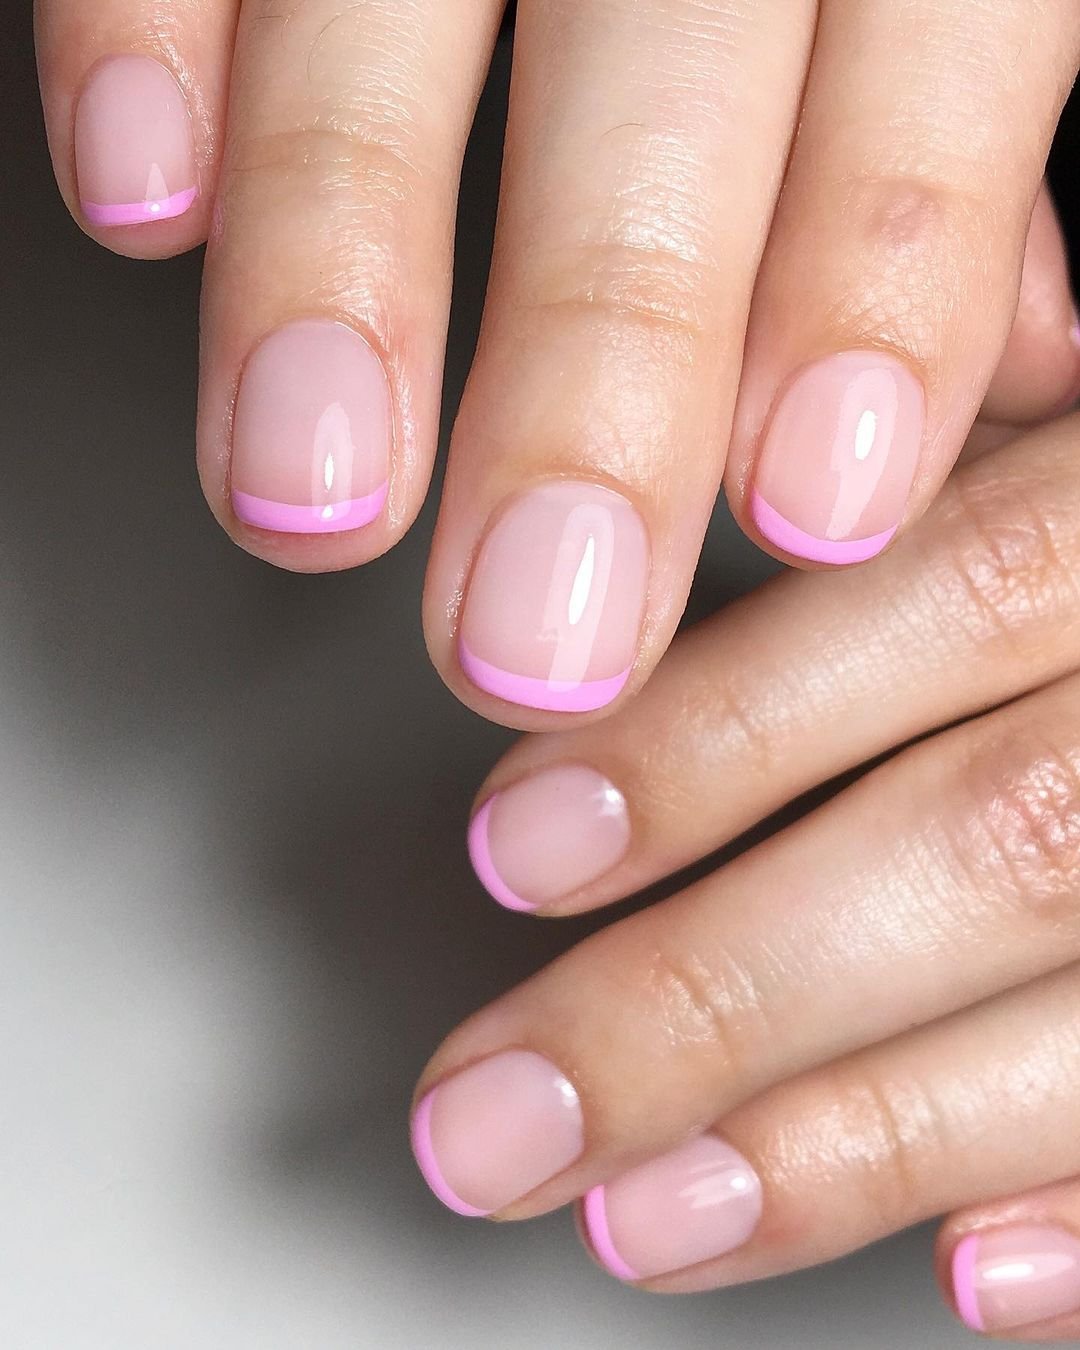 15 - Picture of Pink French Tip Nails